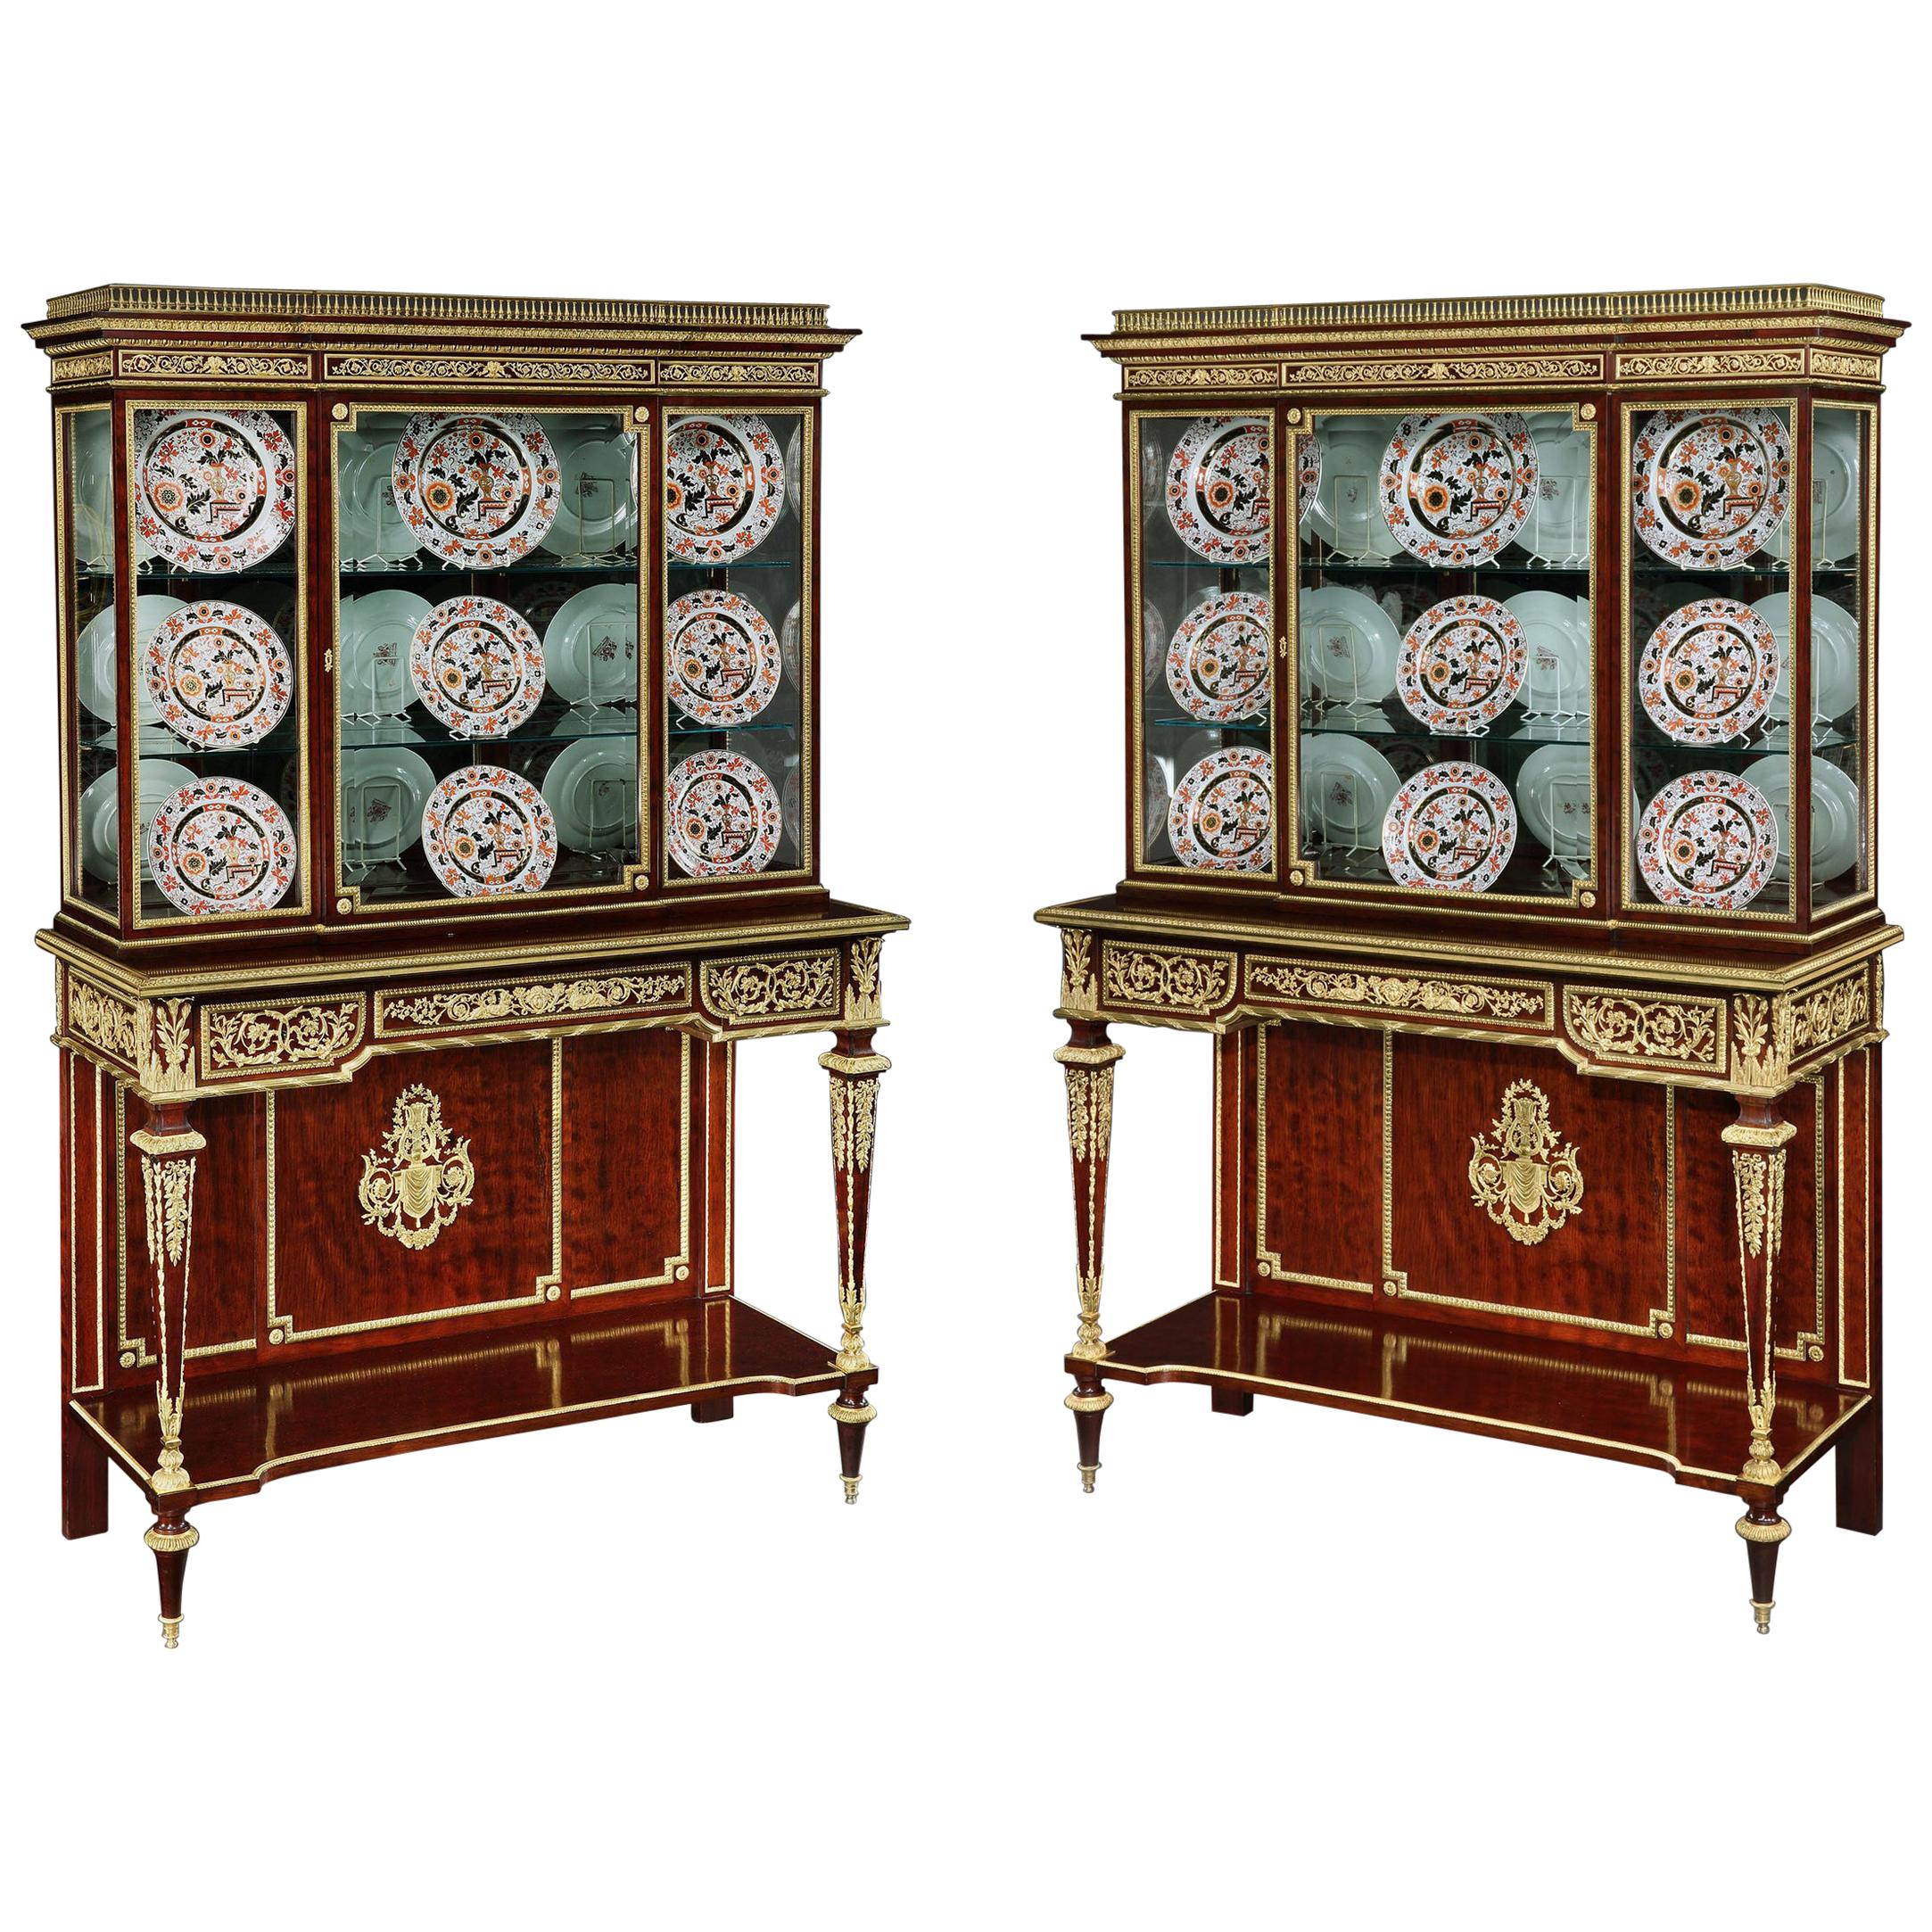 Pair of 19th Century Ormolu-Mounted Mahogany Display Cabinets by Henri Picard